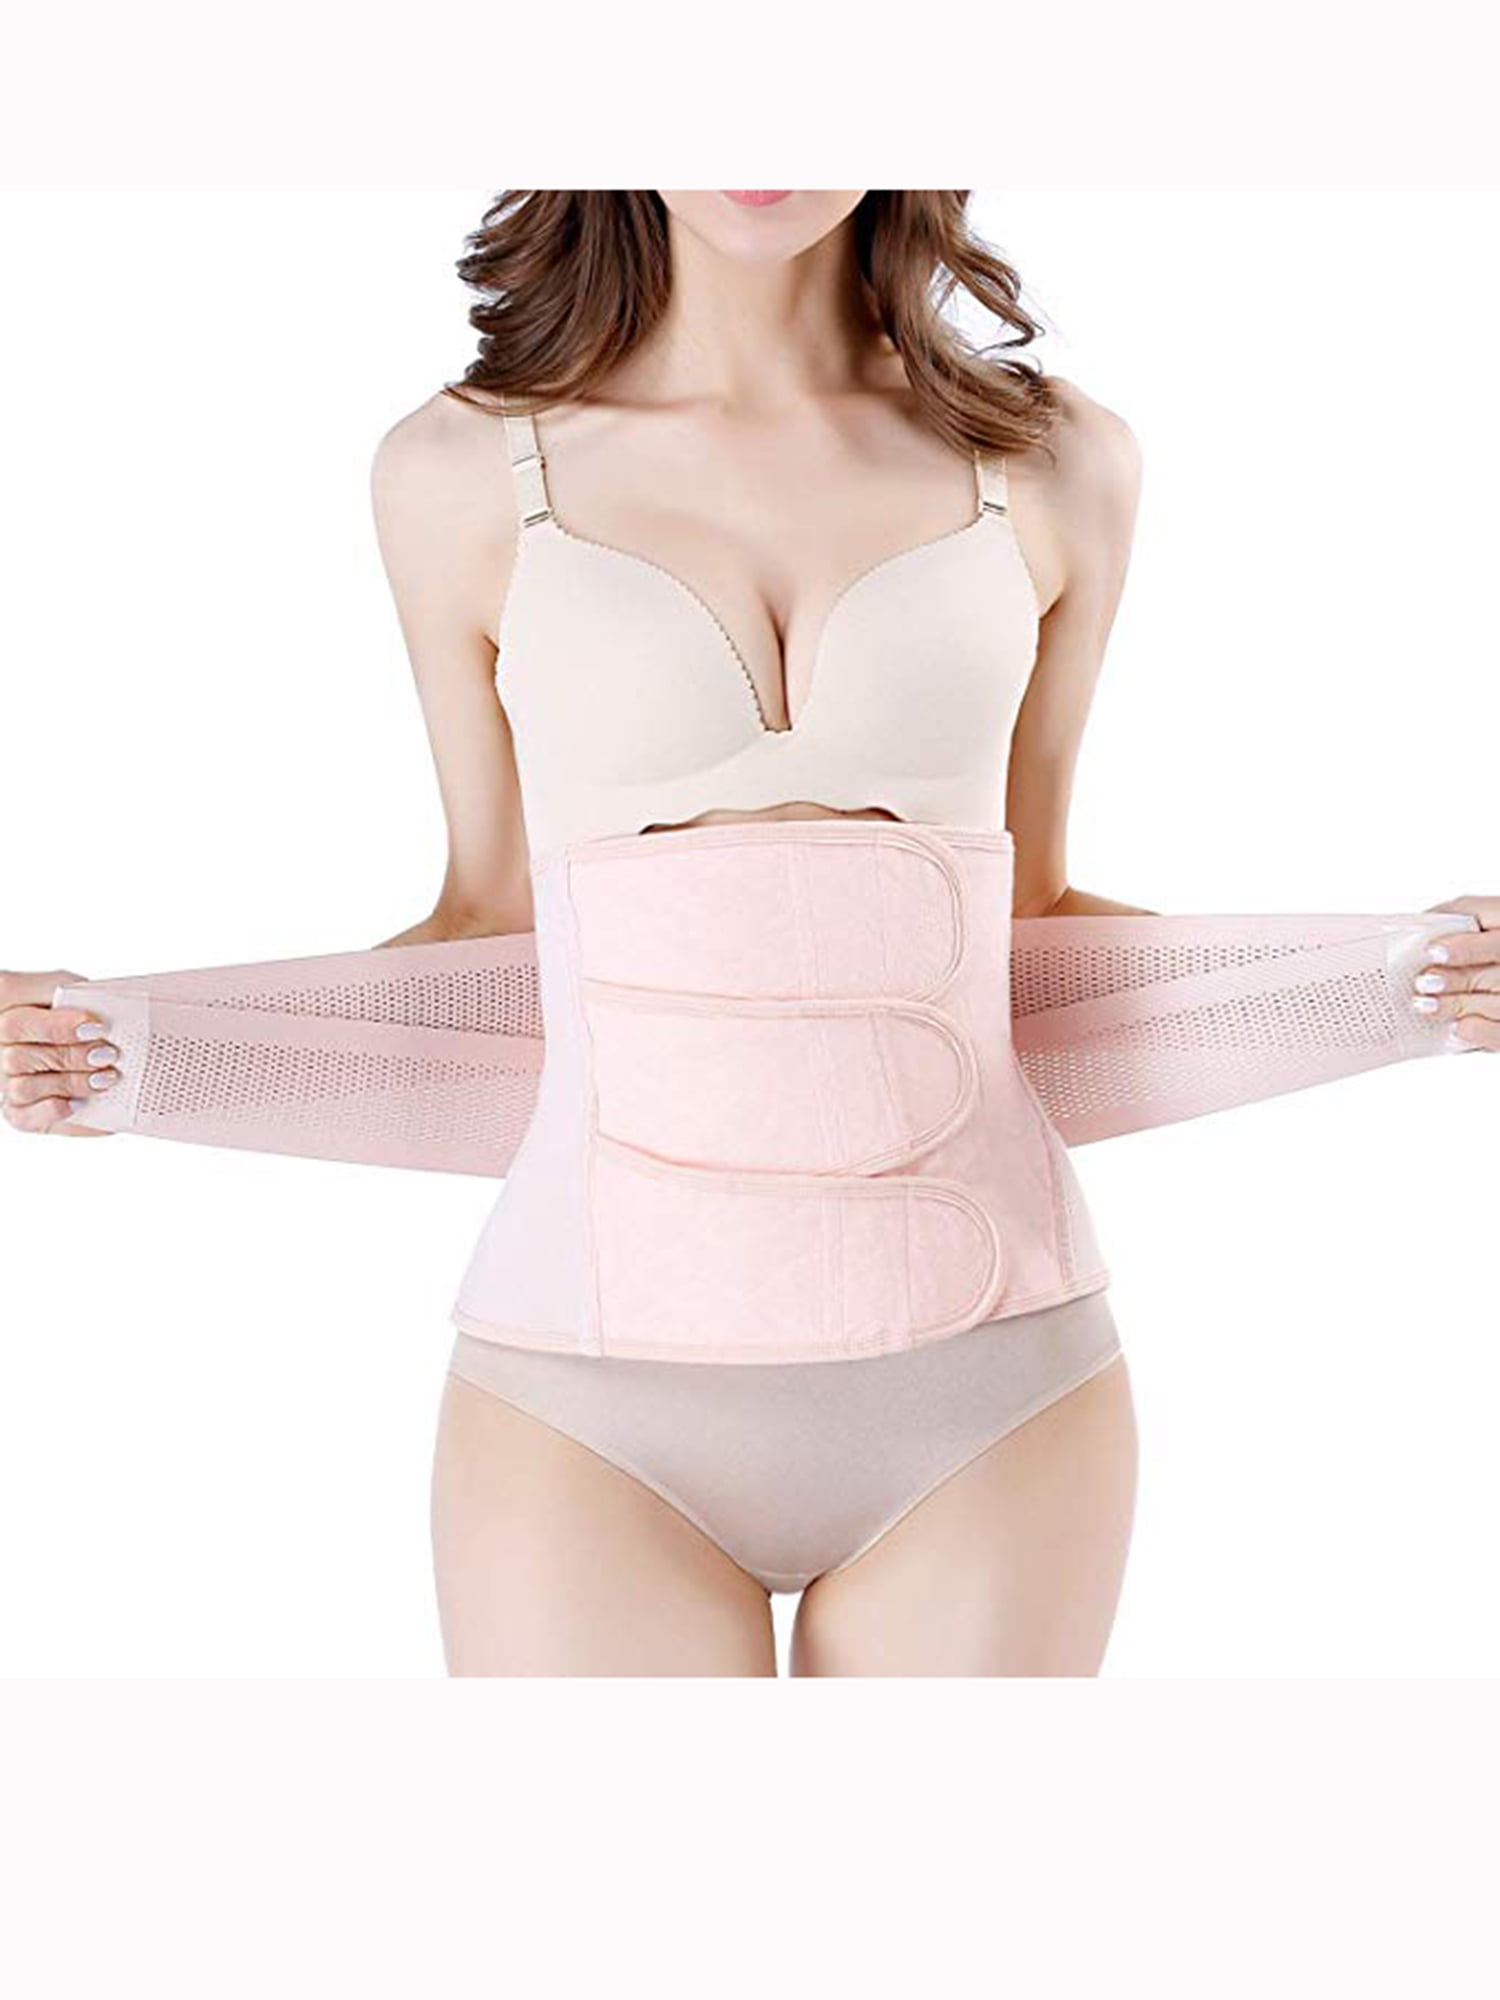 LELINTA Postpartum Girdle C-Section Recovery Belt Back Support Belly Wrap  Belly Band Shapewear